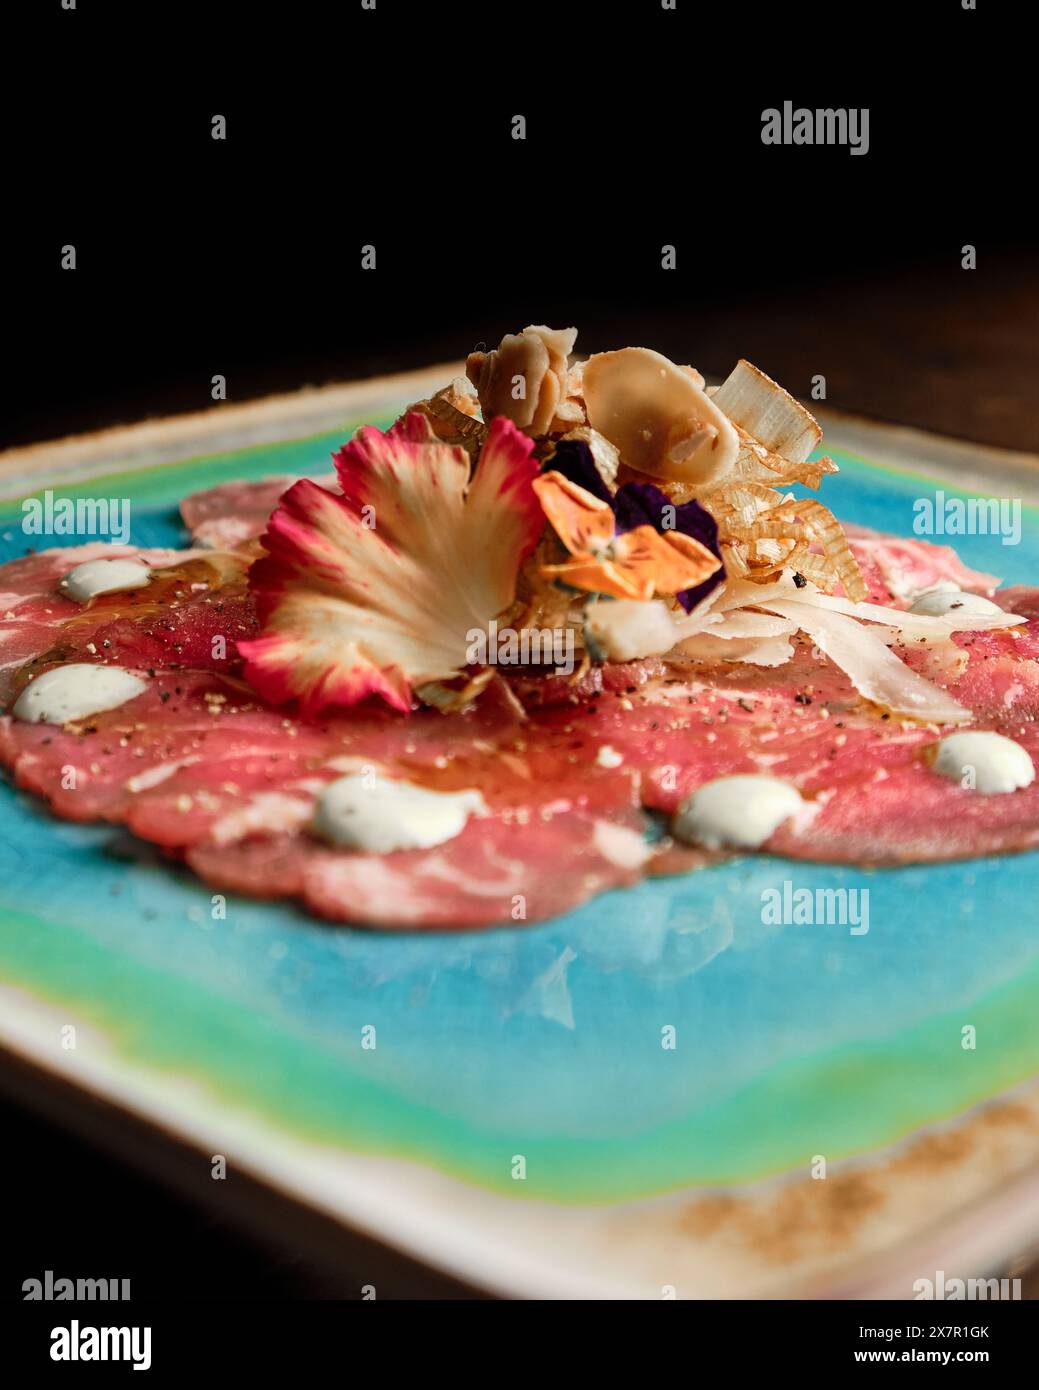 Elegant presentation of a beef carpaccio, adorned with edible flowers, mushrooms, and dollops of sauce on a vibrant ceramic plate Ideal for fine dinin Stock Photo